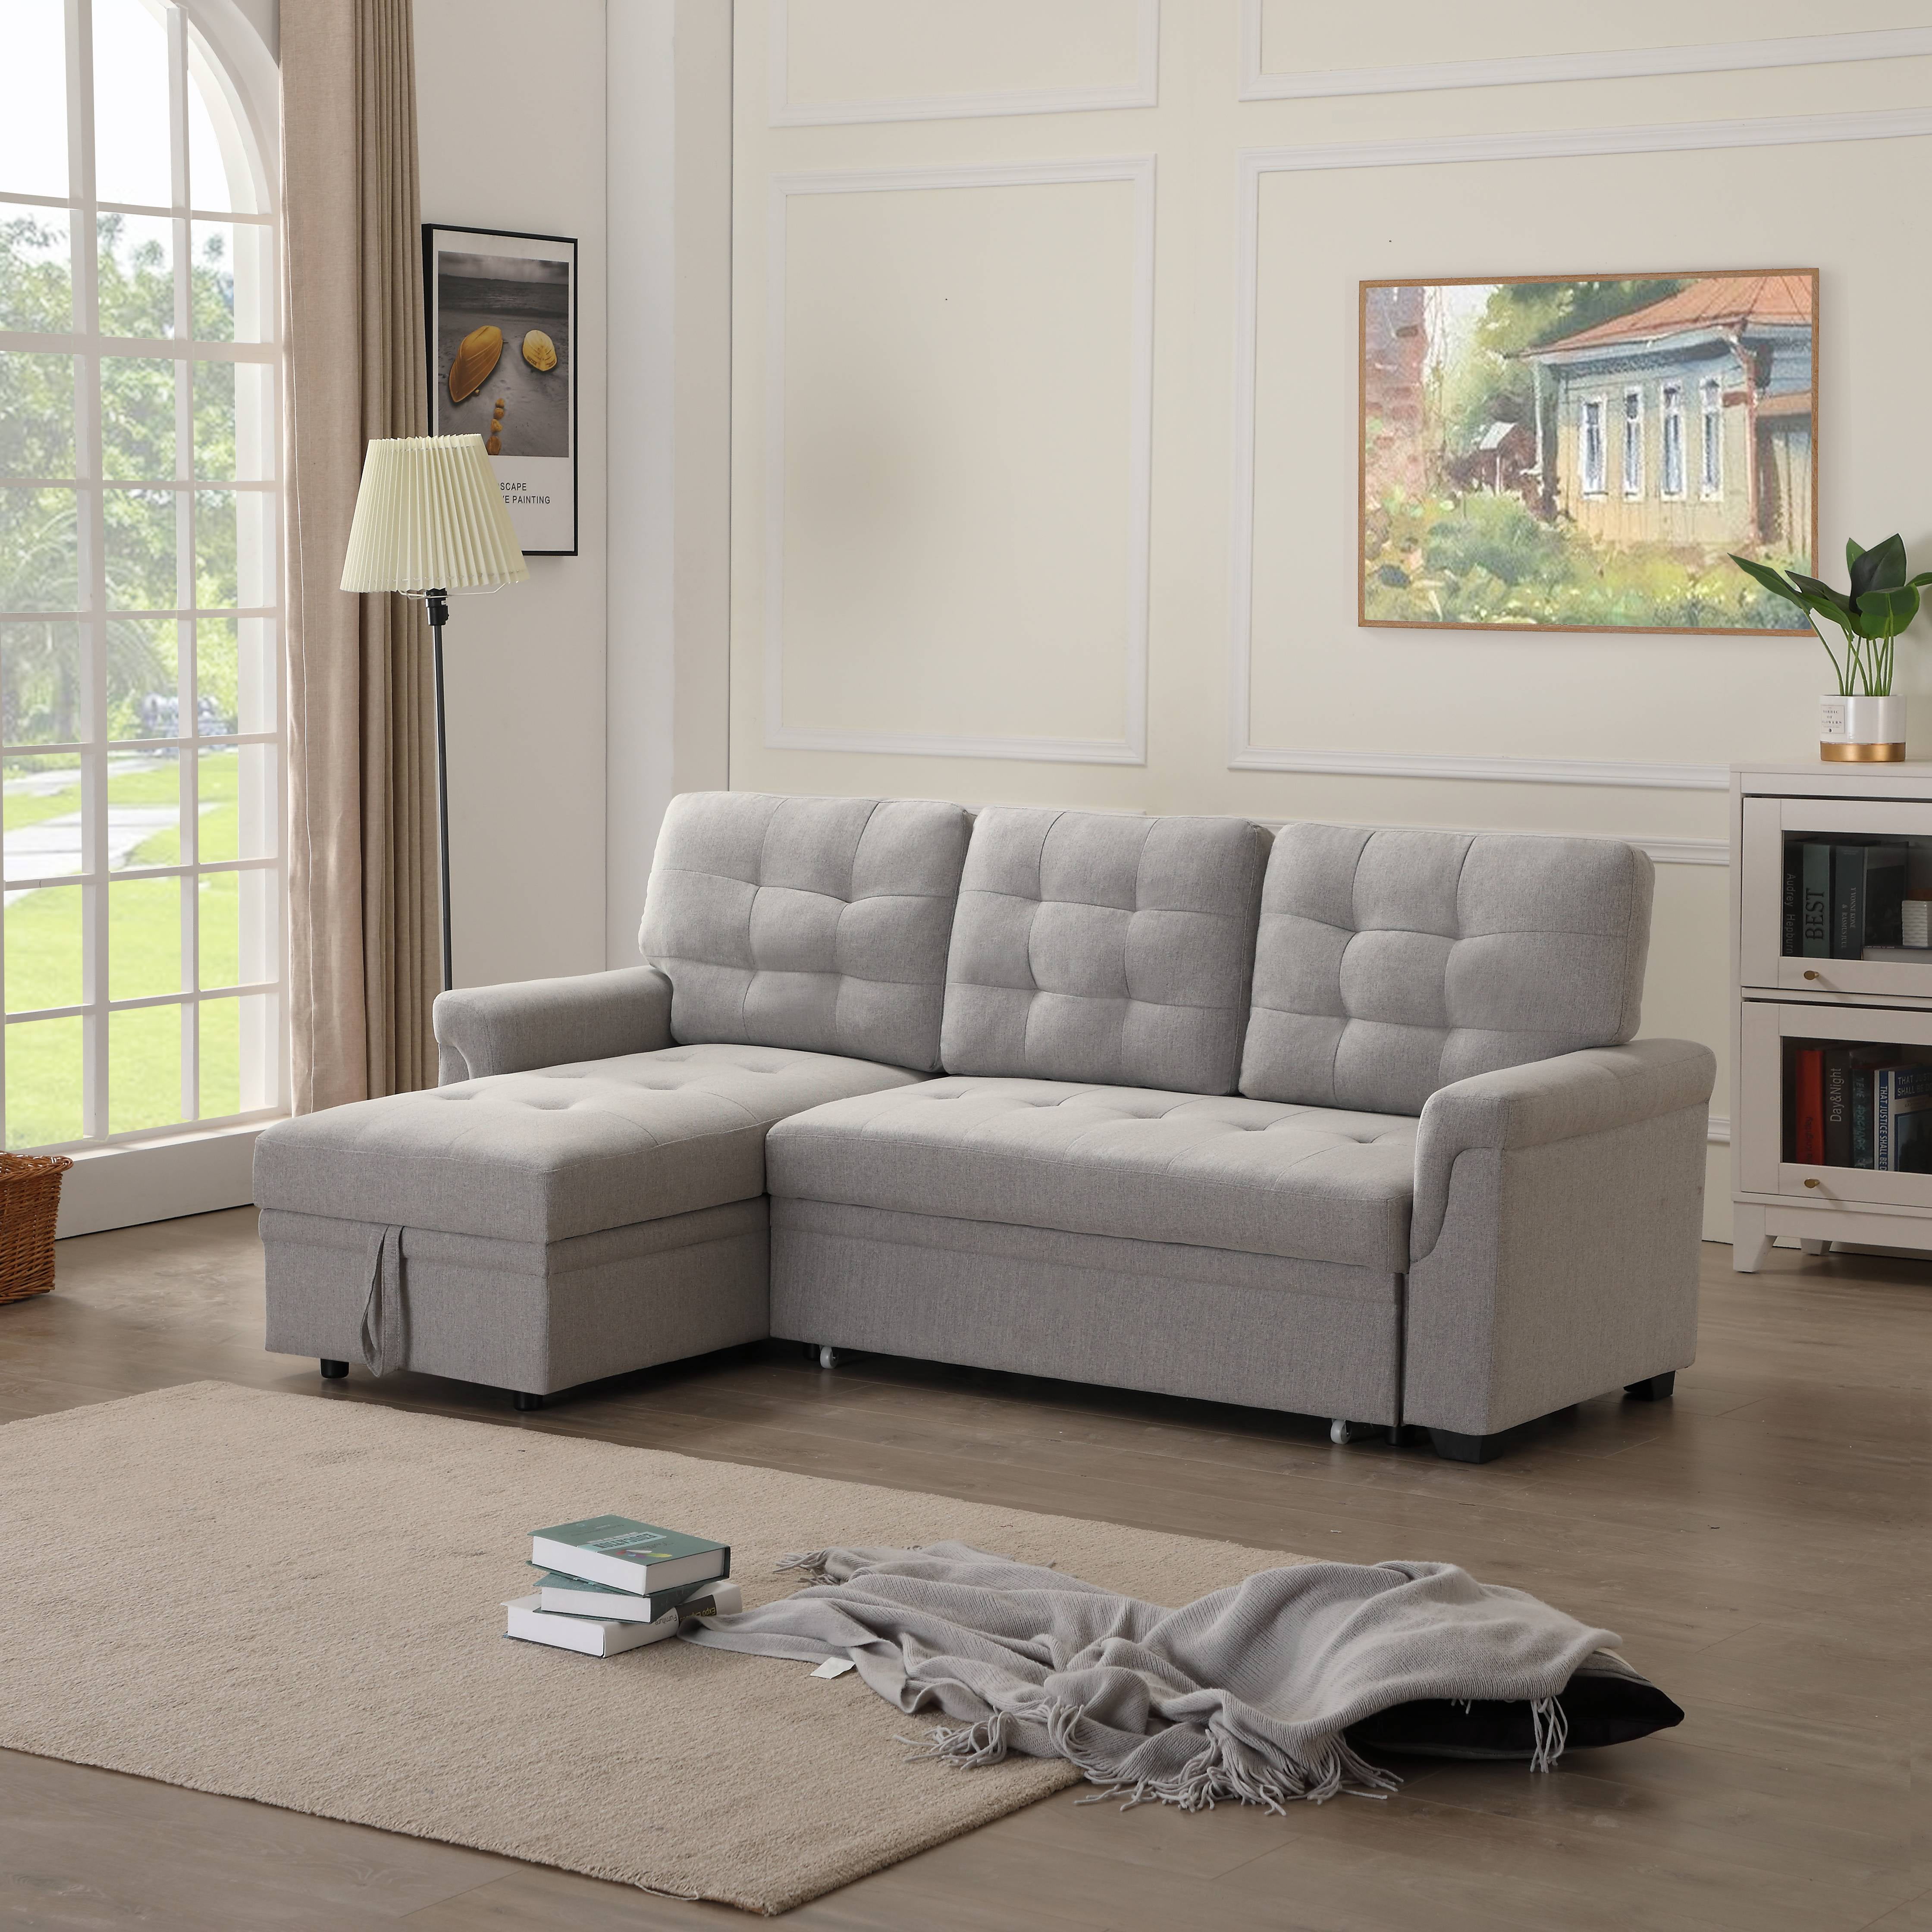 86-w-modern-sectional-sofa-bed-with-reversible-chaise-l-shaped-3-seat